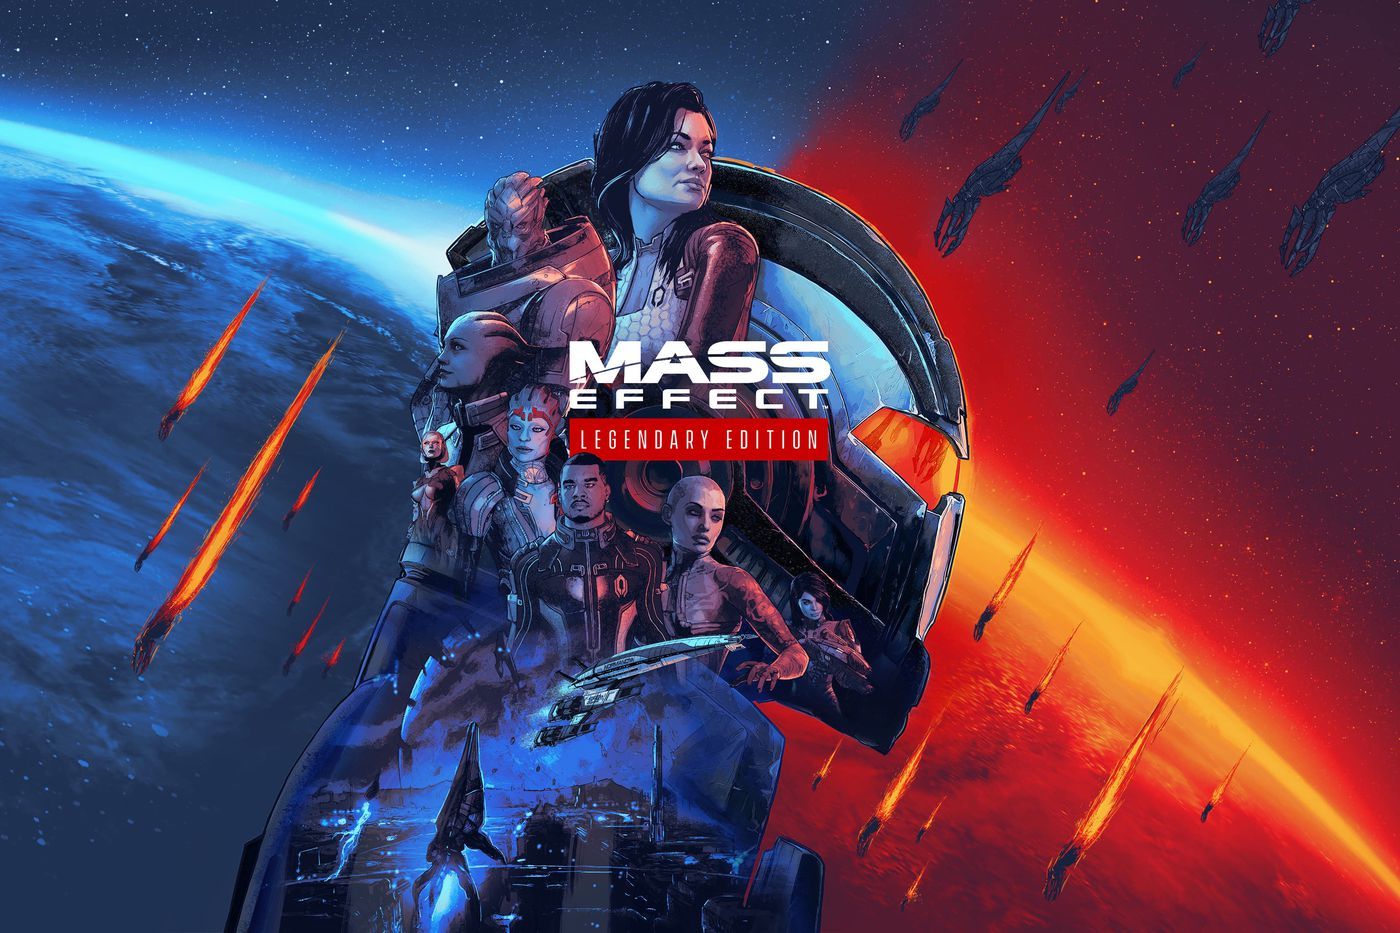 Make your own Mass Effect Legendary Edition cover, download bonus content